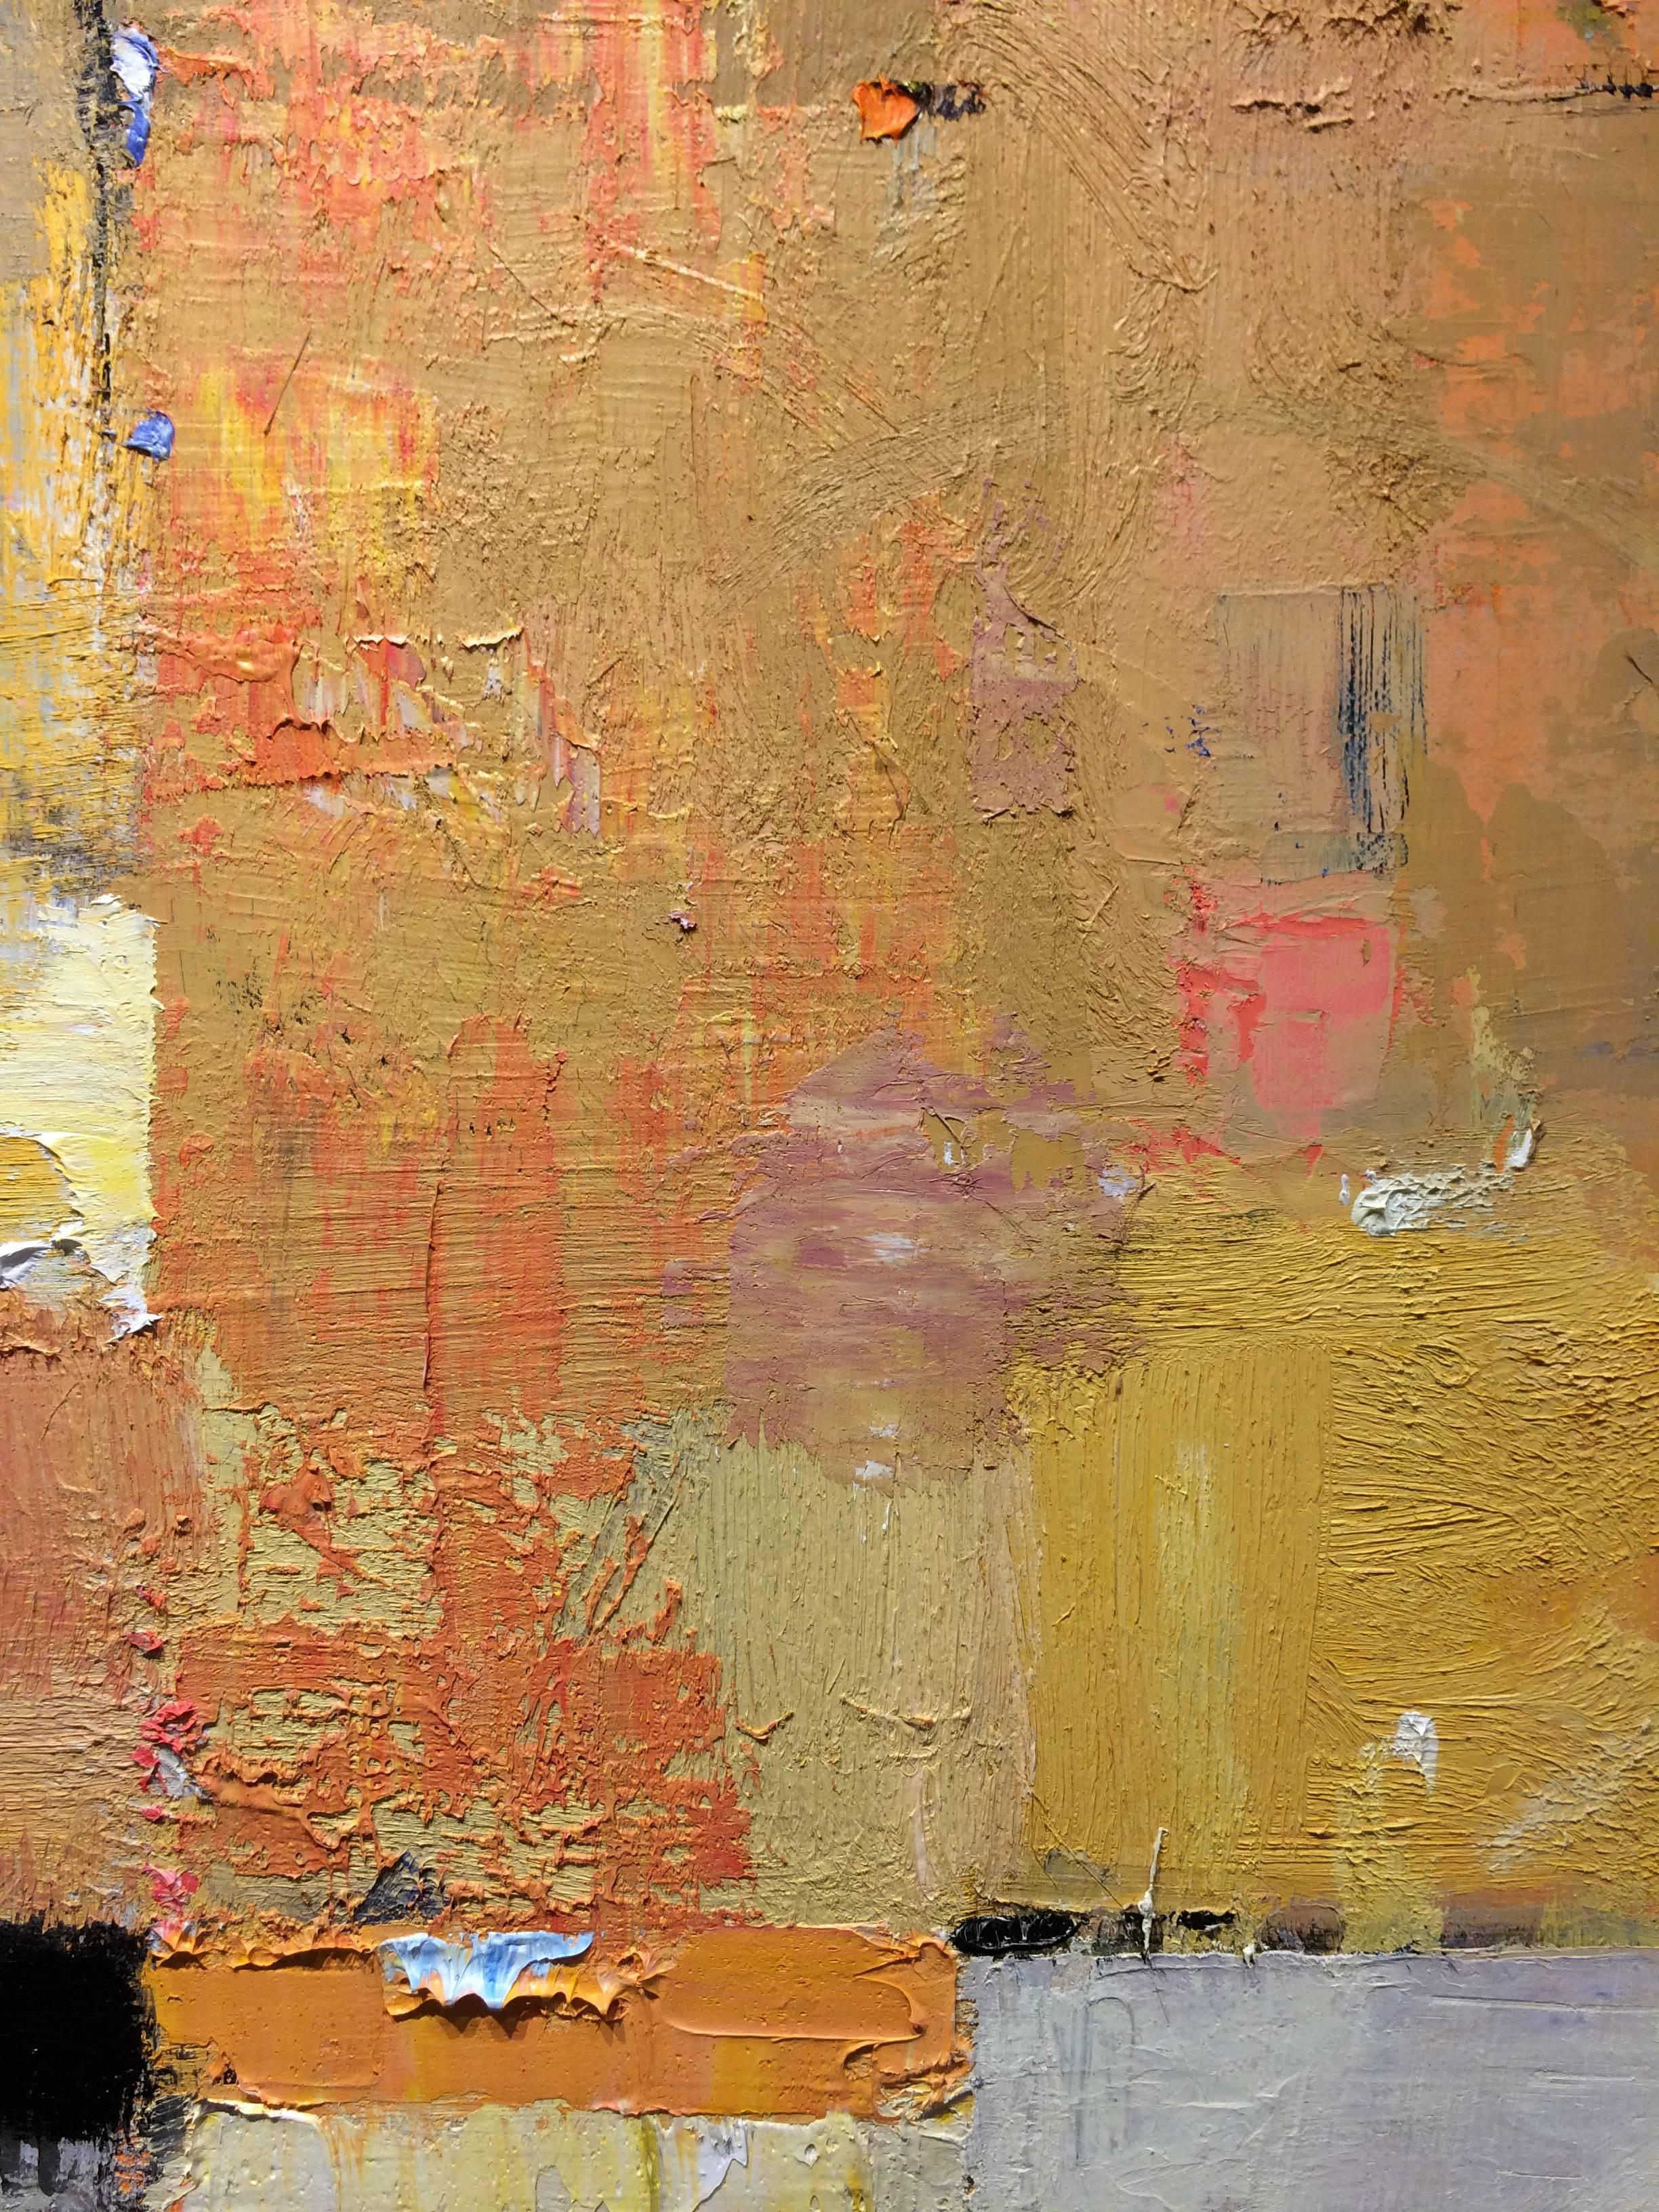 Peom In Gold And Gray - Abstract Painting by David Michael Slonim